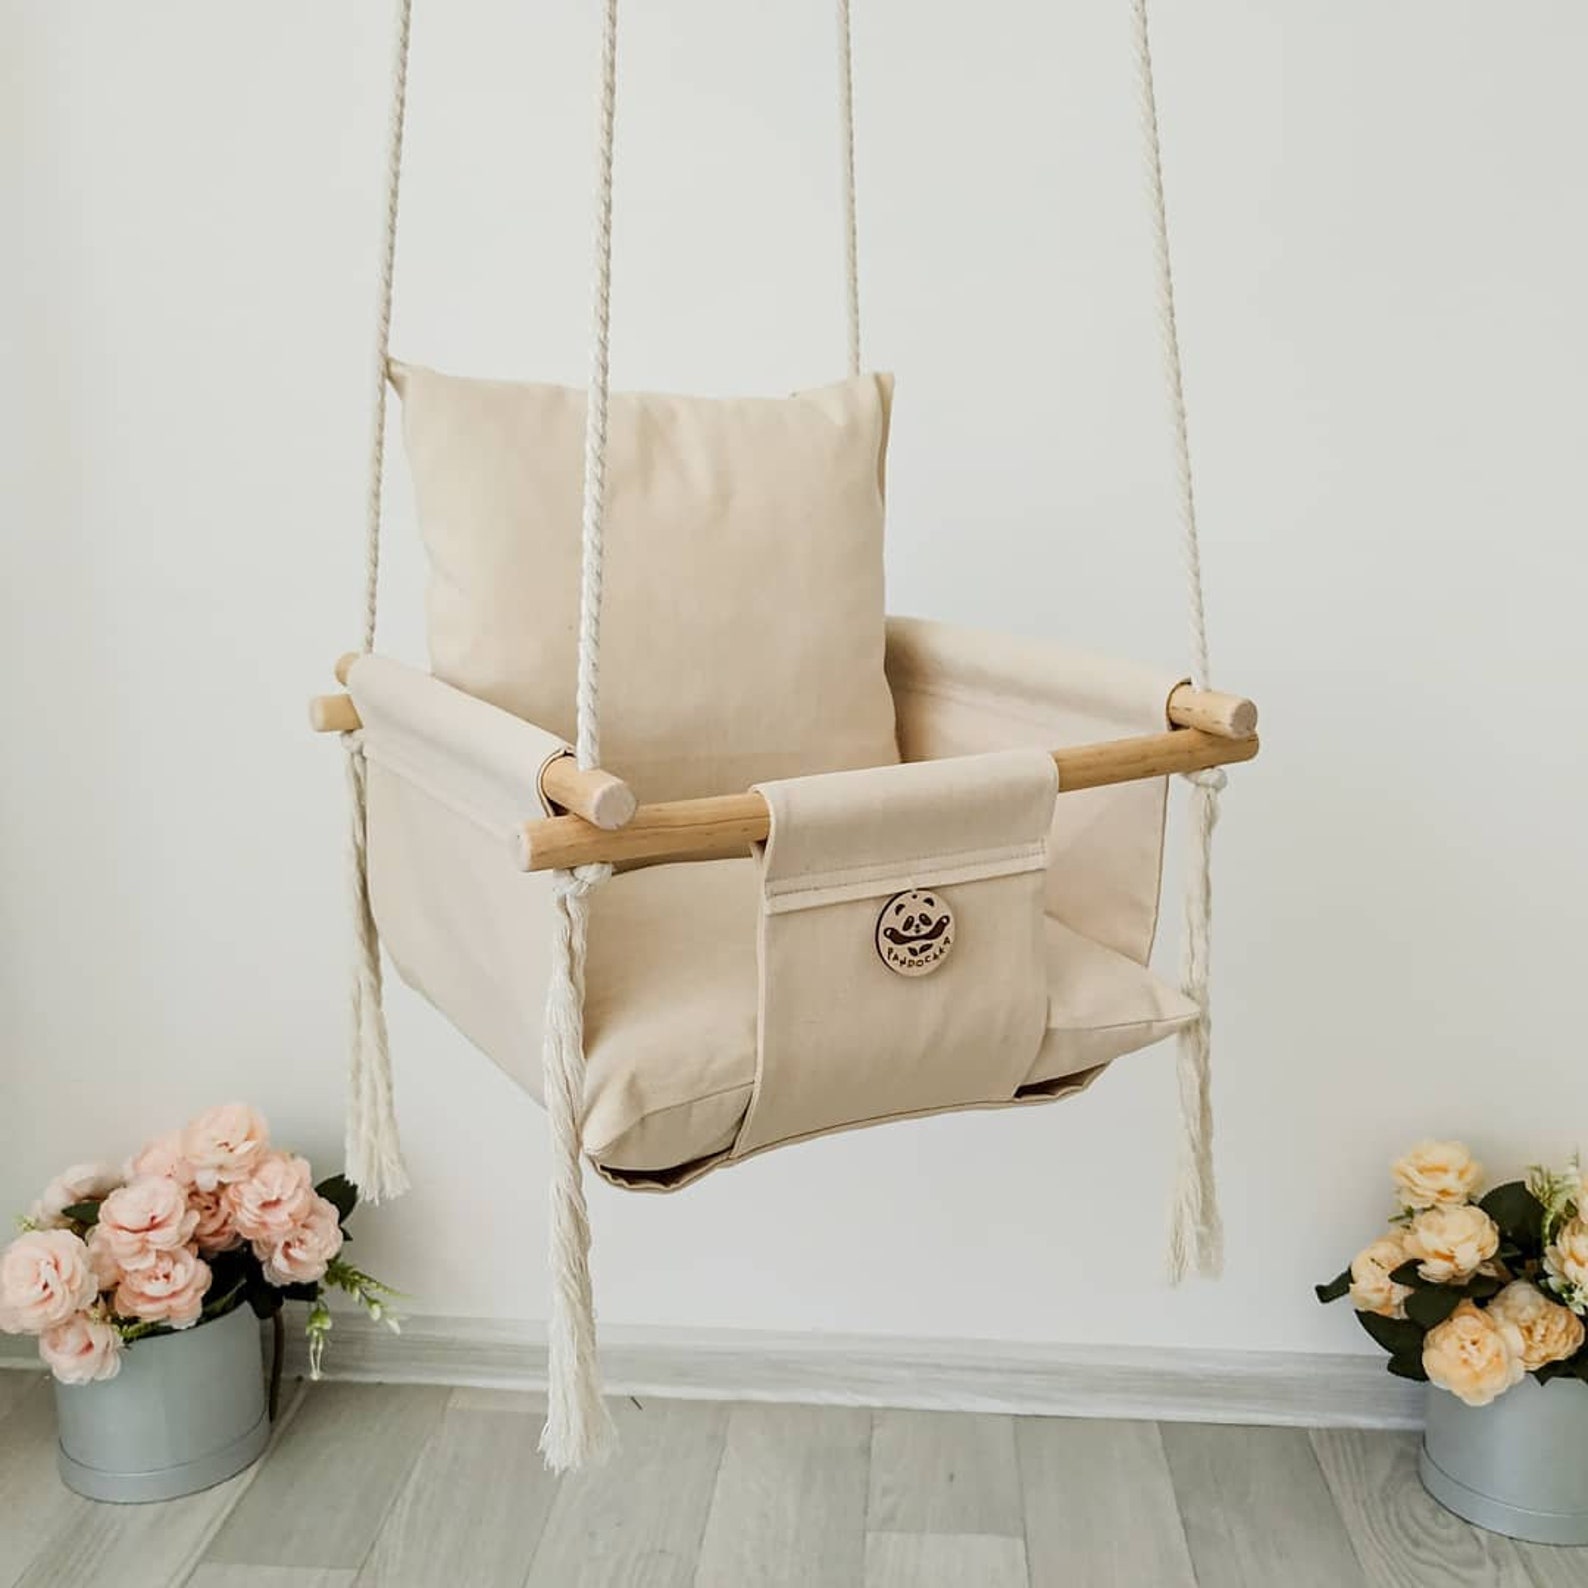  Swing Chair Indoor Canada with Simple Decor